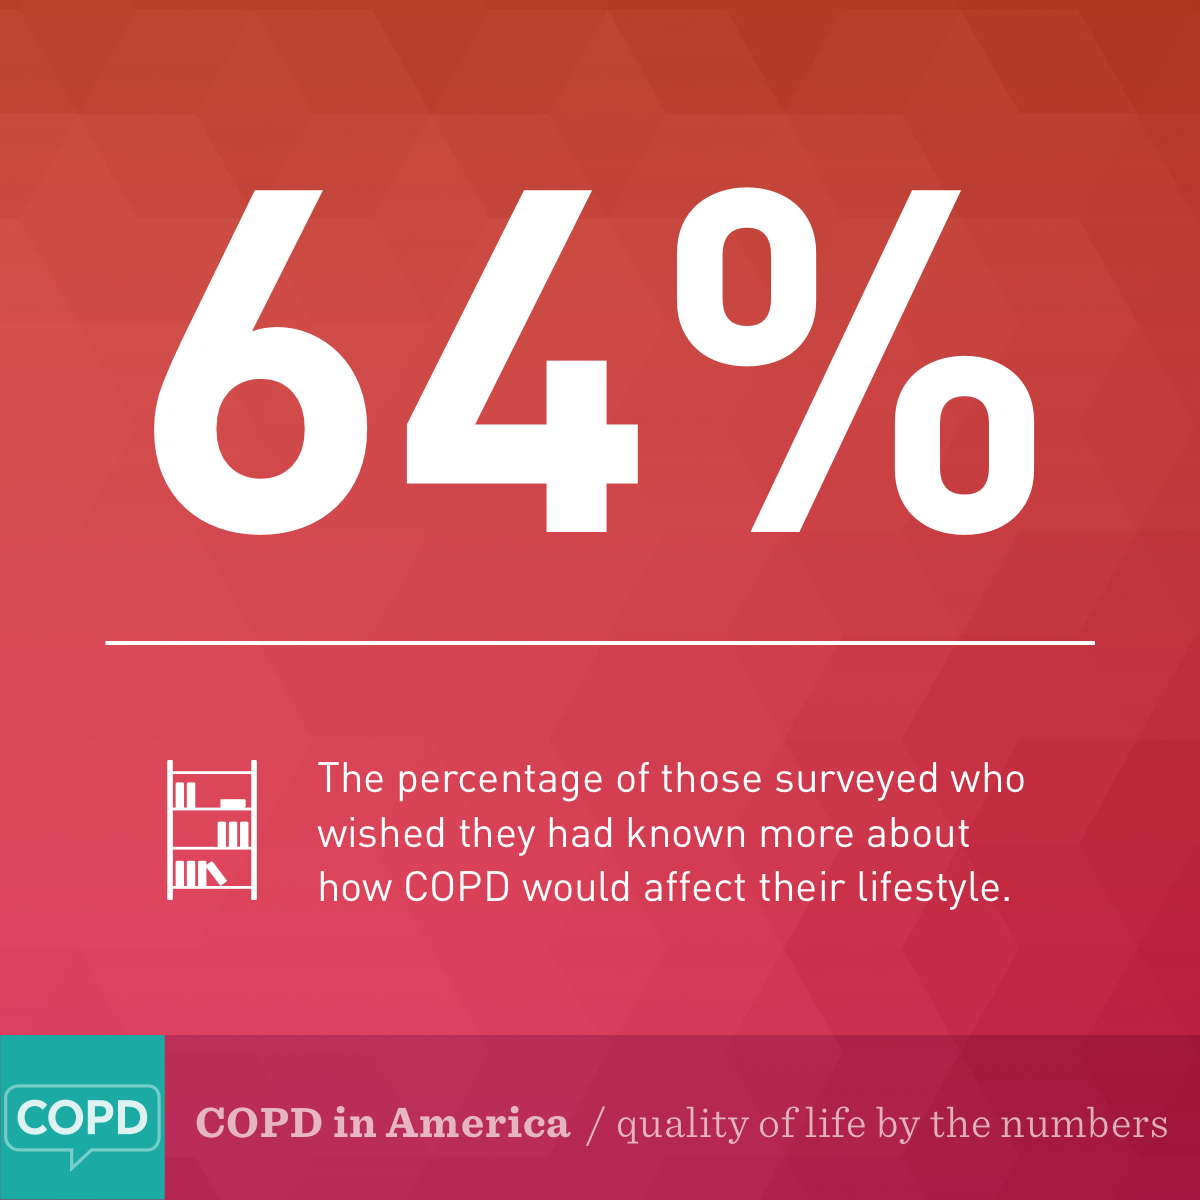 COPD quality of life by the numbers